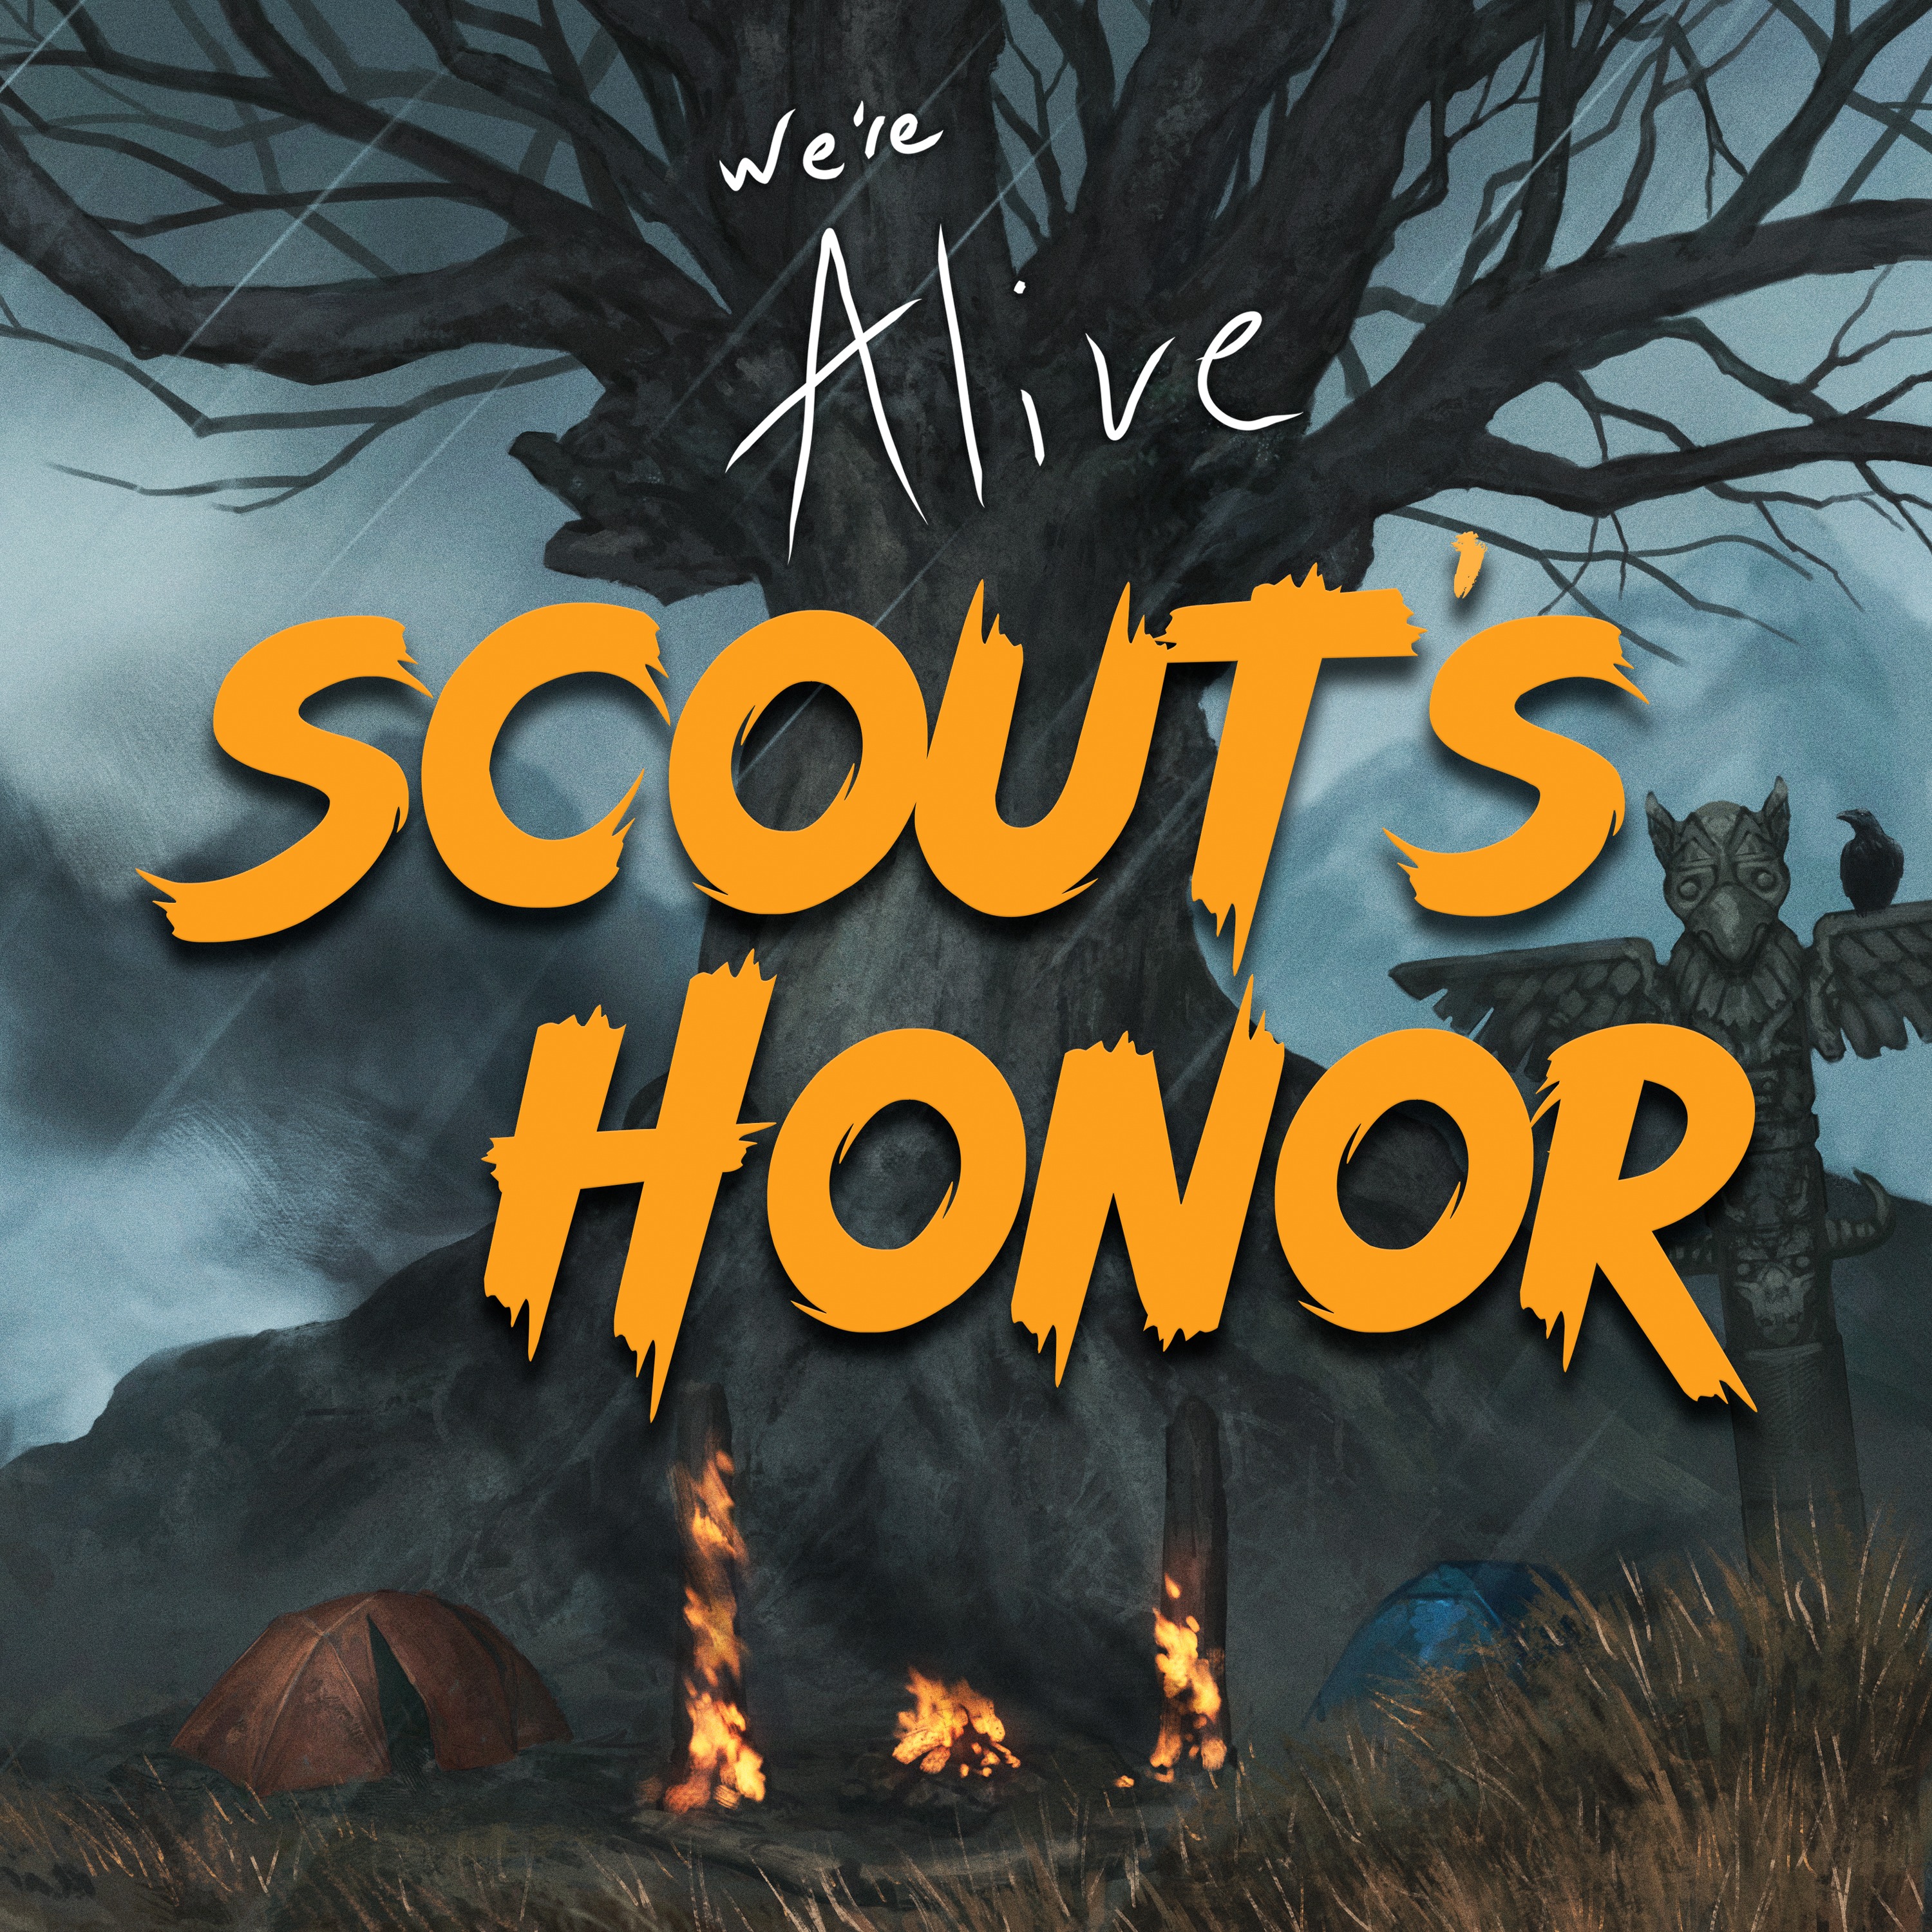 Presenting We’re Alive: Scout’s Honor - Chapter 1 - Welcome to Camp